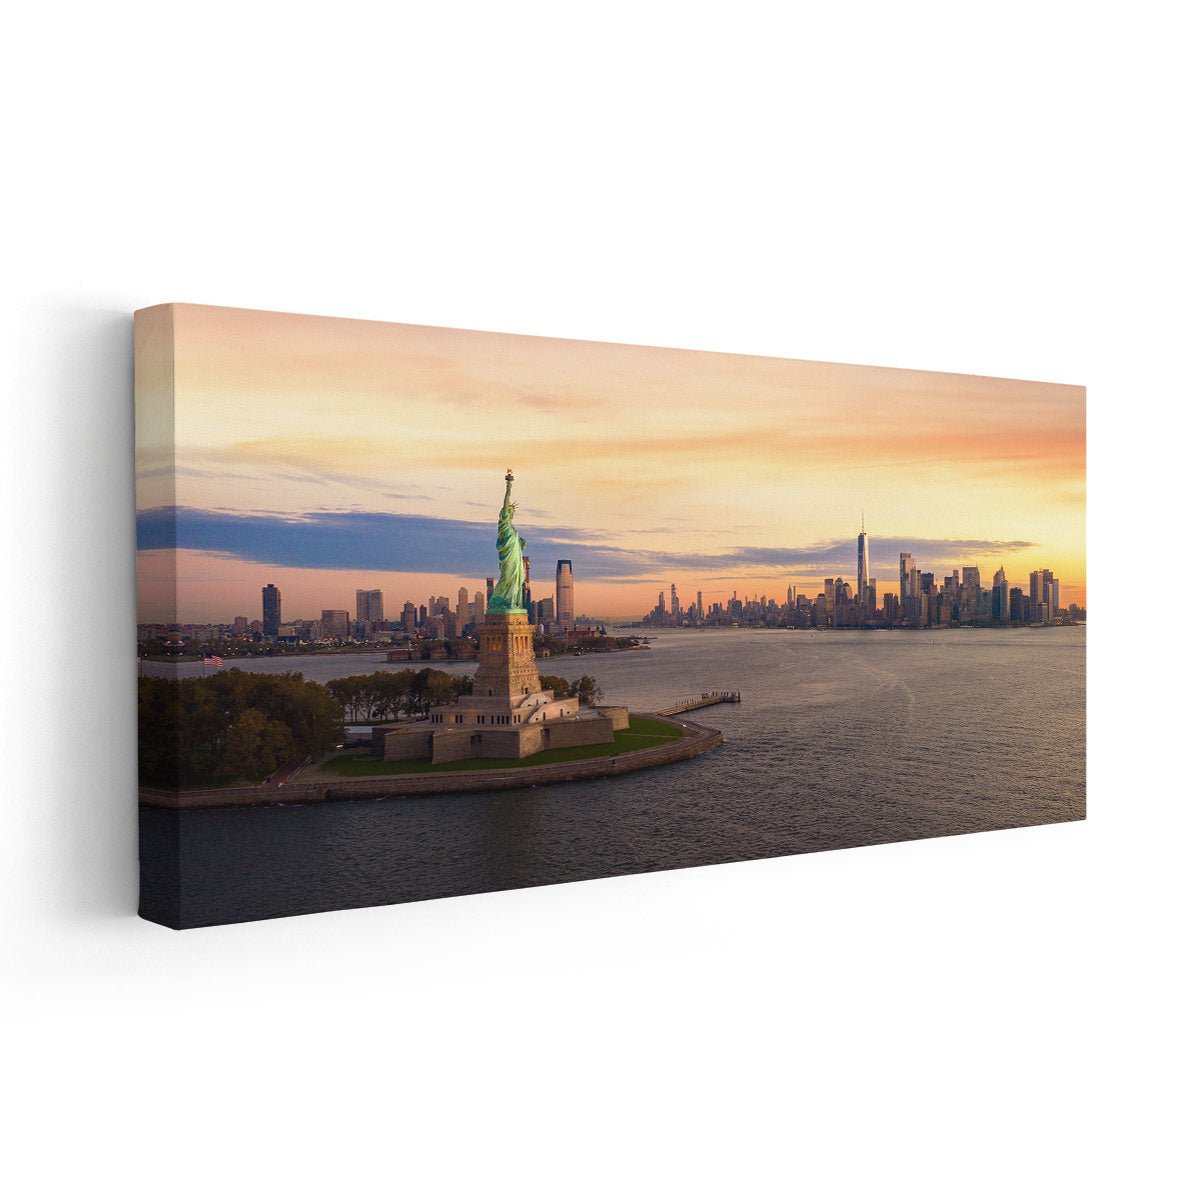 Liberty Statue In New York City Canvas Wall Art-Stunning Canvas Prints